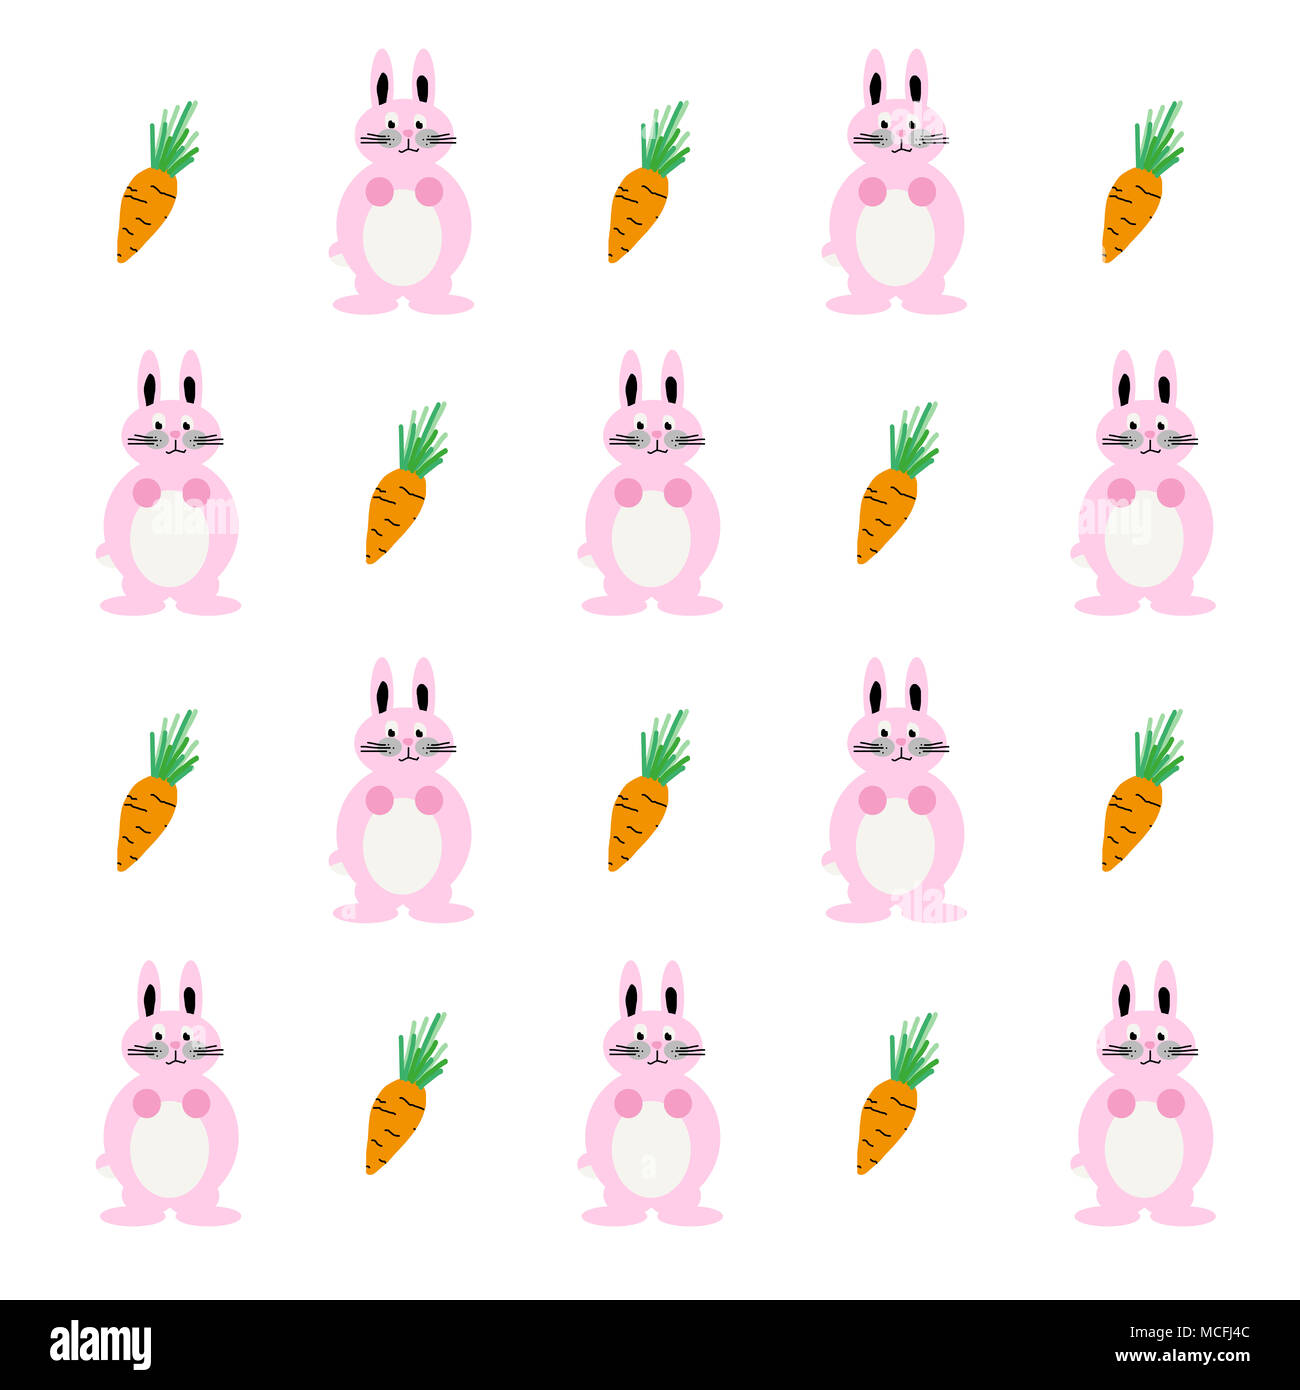 Cute and colorful bunny illustration including multiple baby pink rabbits with some carrots. Lovely childlike drawing. Stock Photo